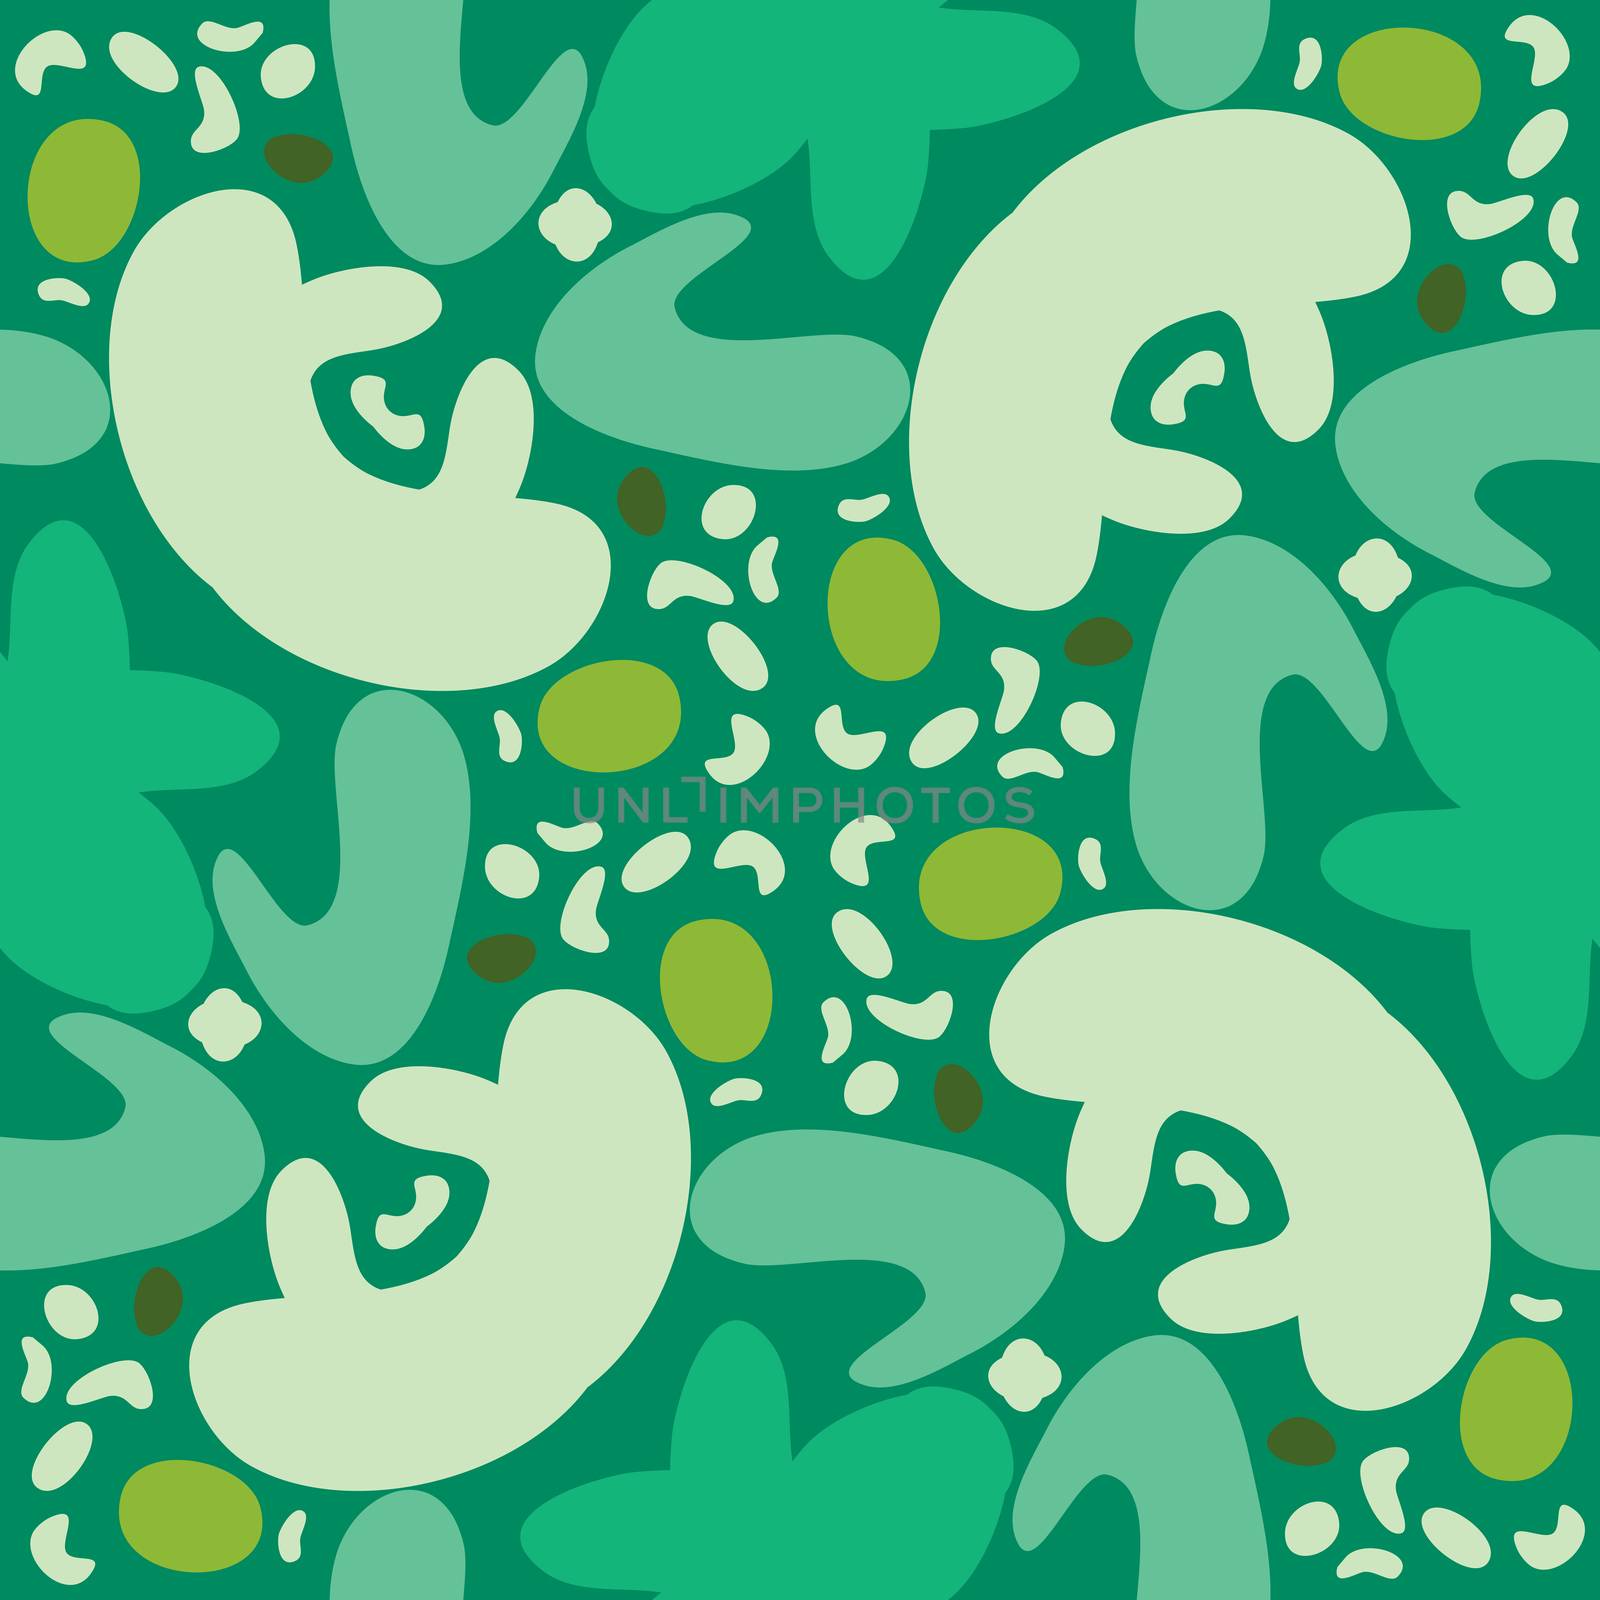 Repeating Tiled Green Shapes by TheBlackRhino